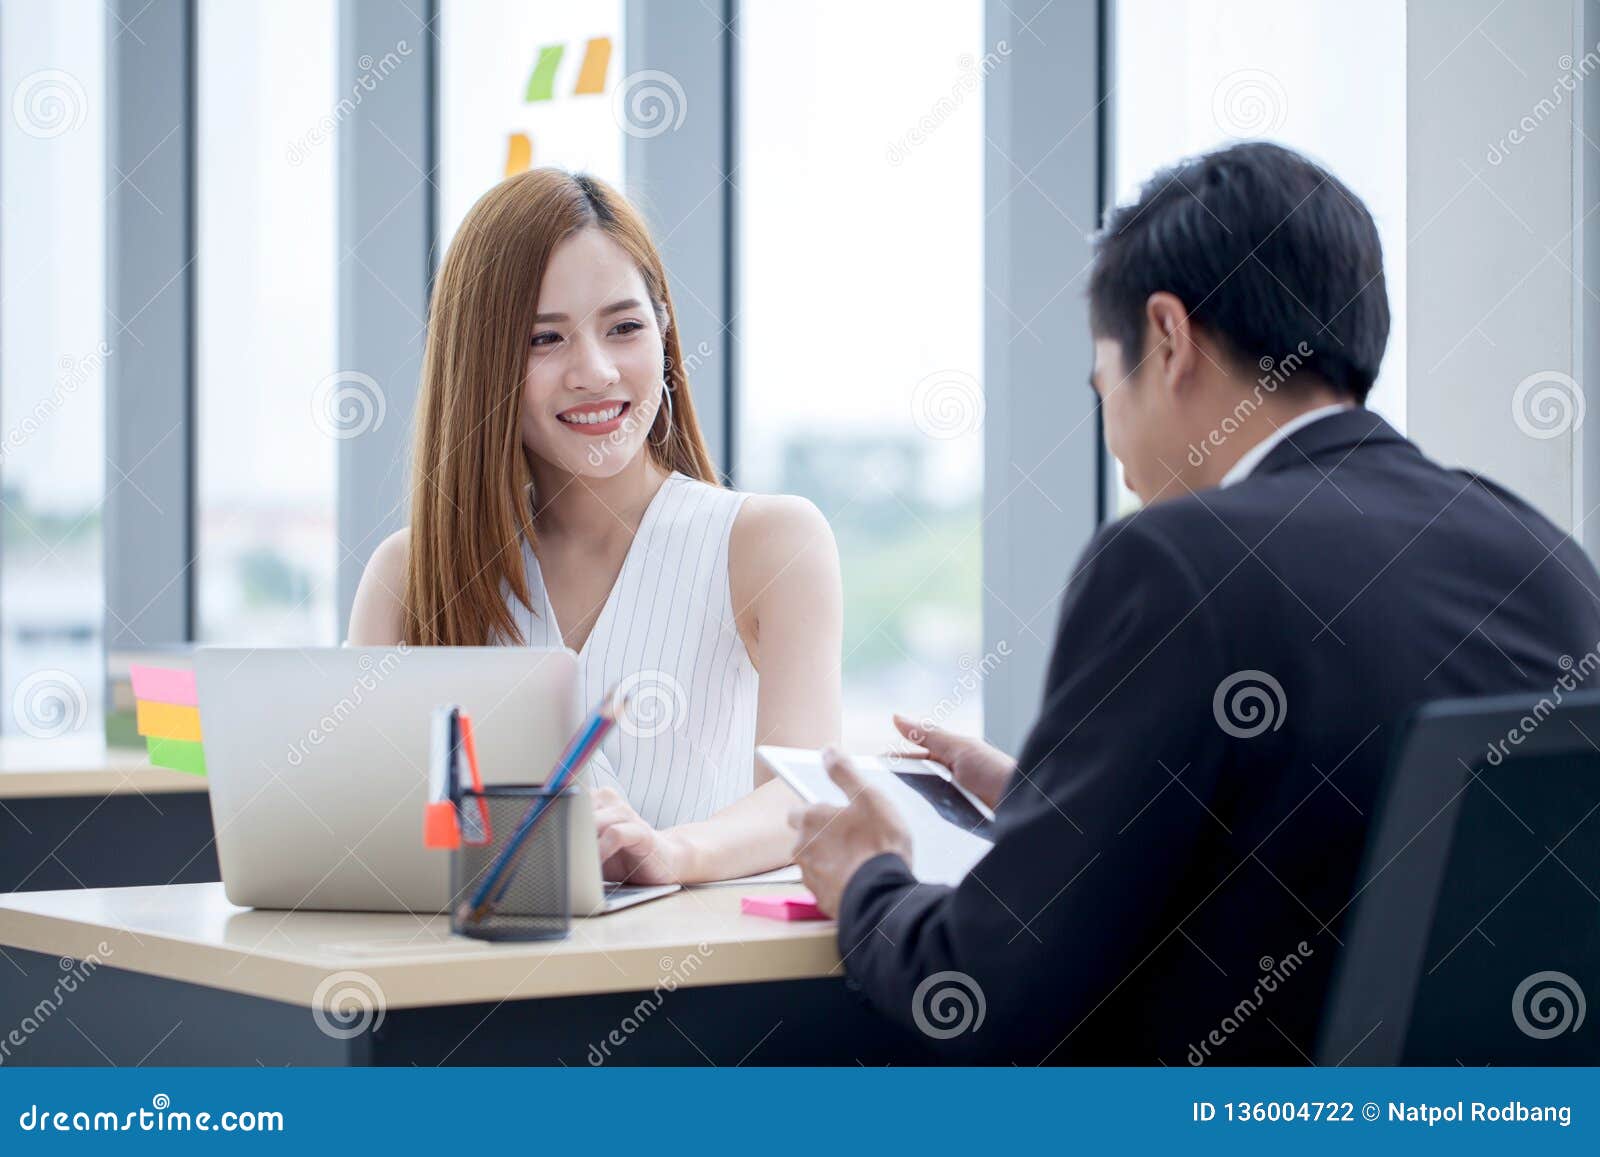 Business Partners Team Working Together On Desk With Laptop And